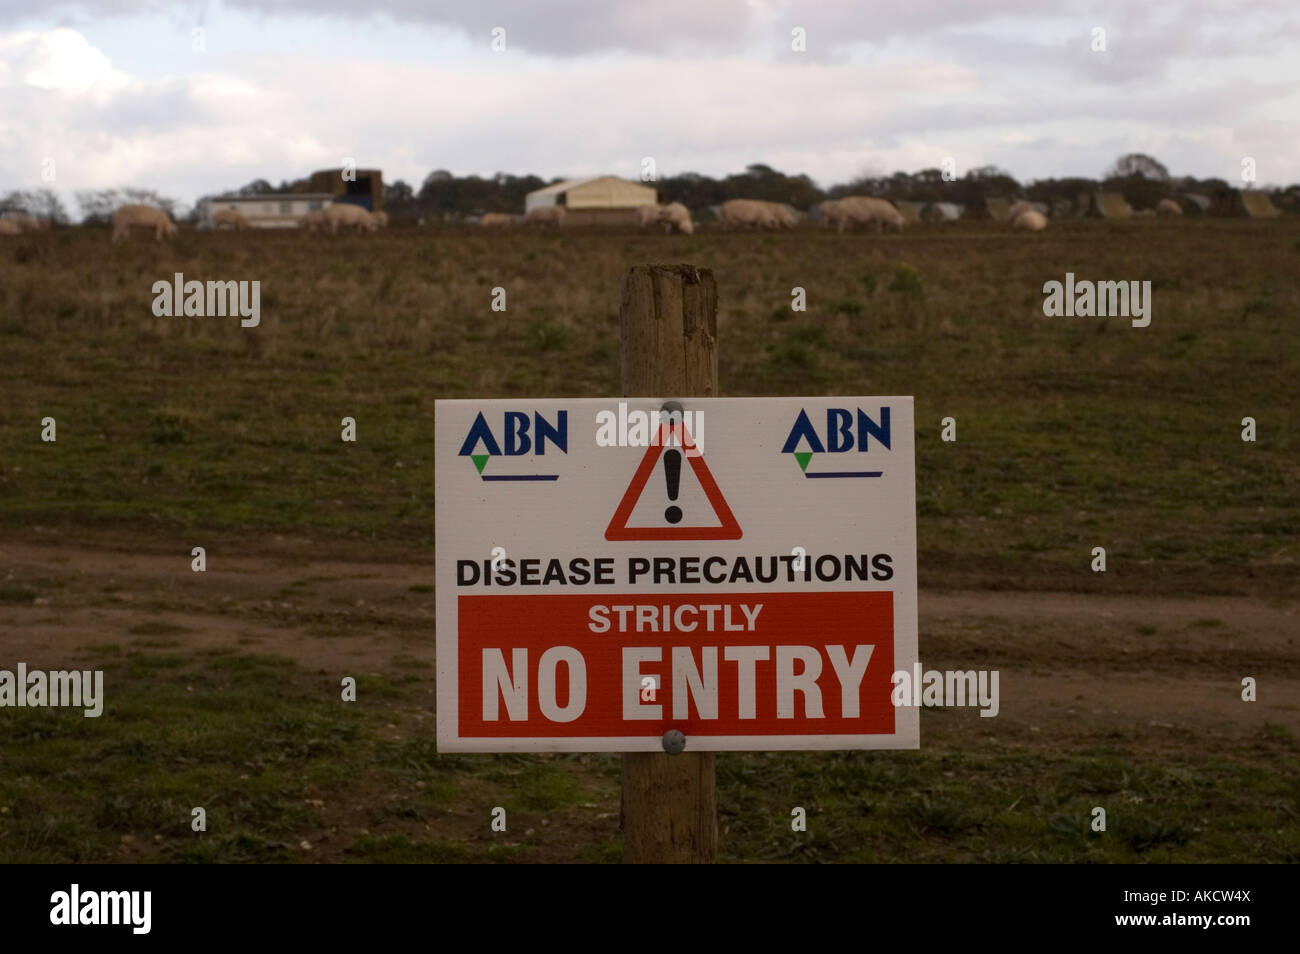 Disease Precautions Sign On Field Of Pigs in uk Stock Photo